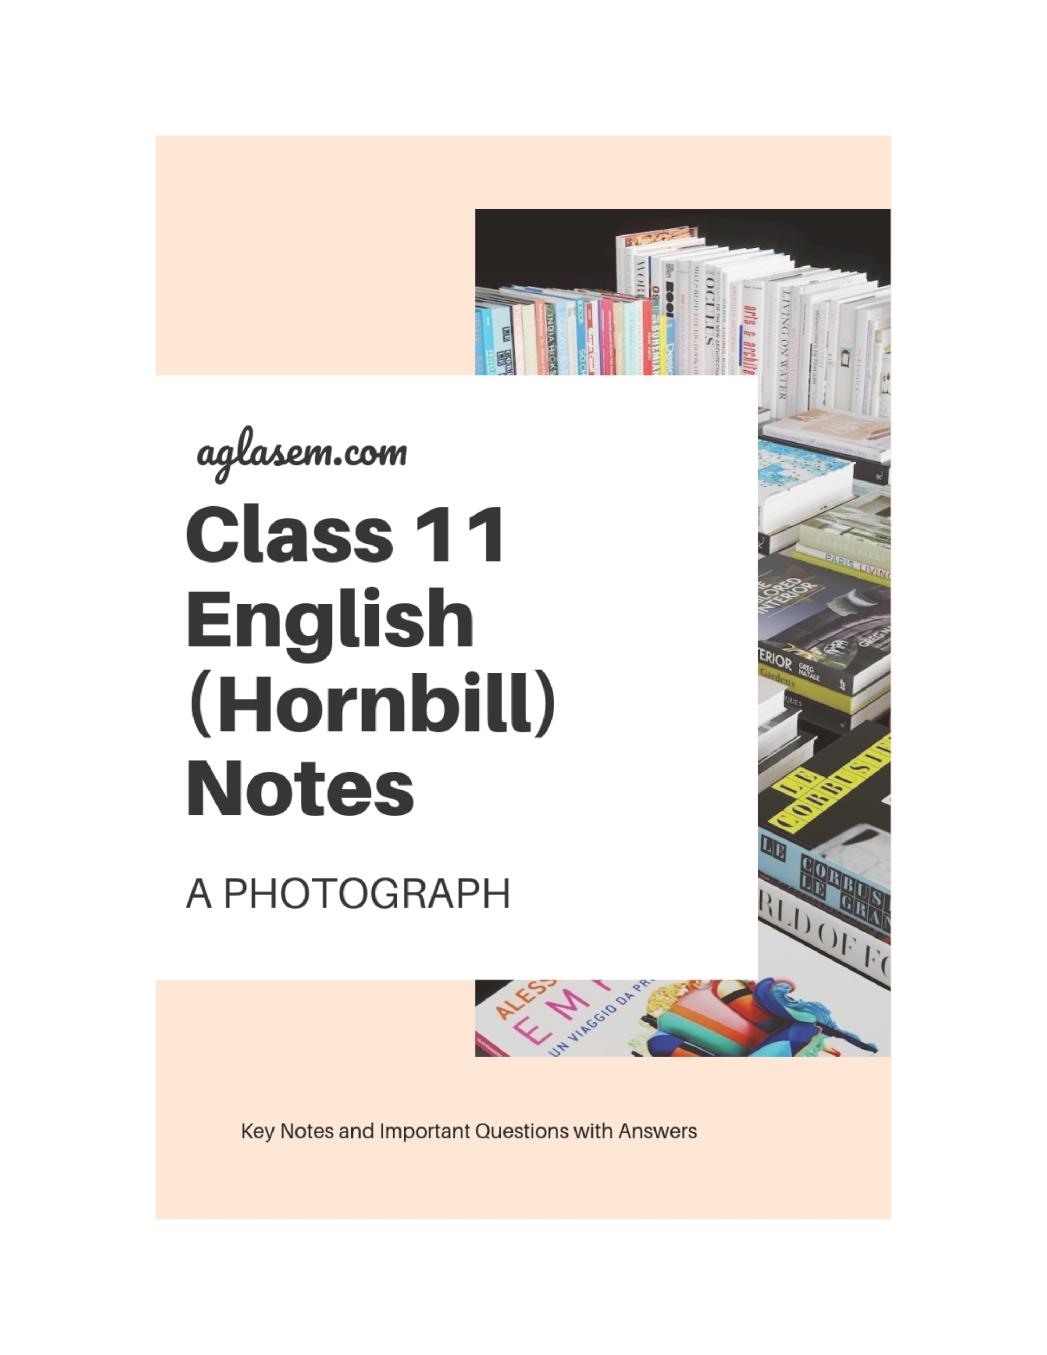 Class 11 English Hornbill Notes For A Photograph - Page 1